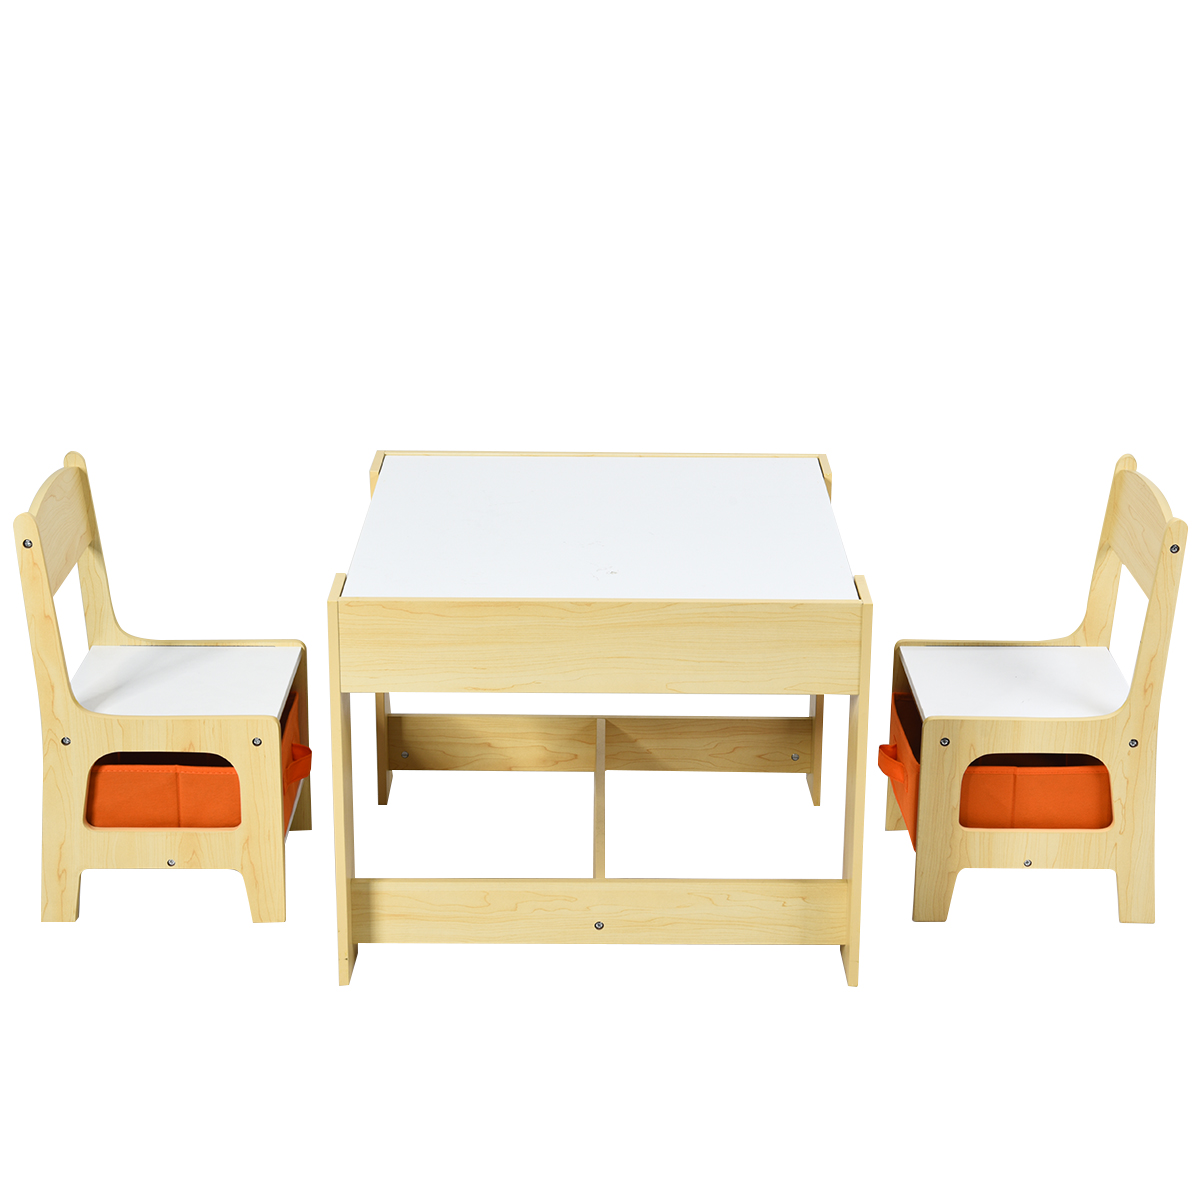 Costway Kids Table Chairs Set With Storage Boxes Blackboard Whiteboard Drawing Nature - image 1 of 10